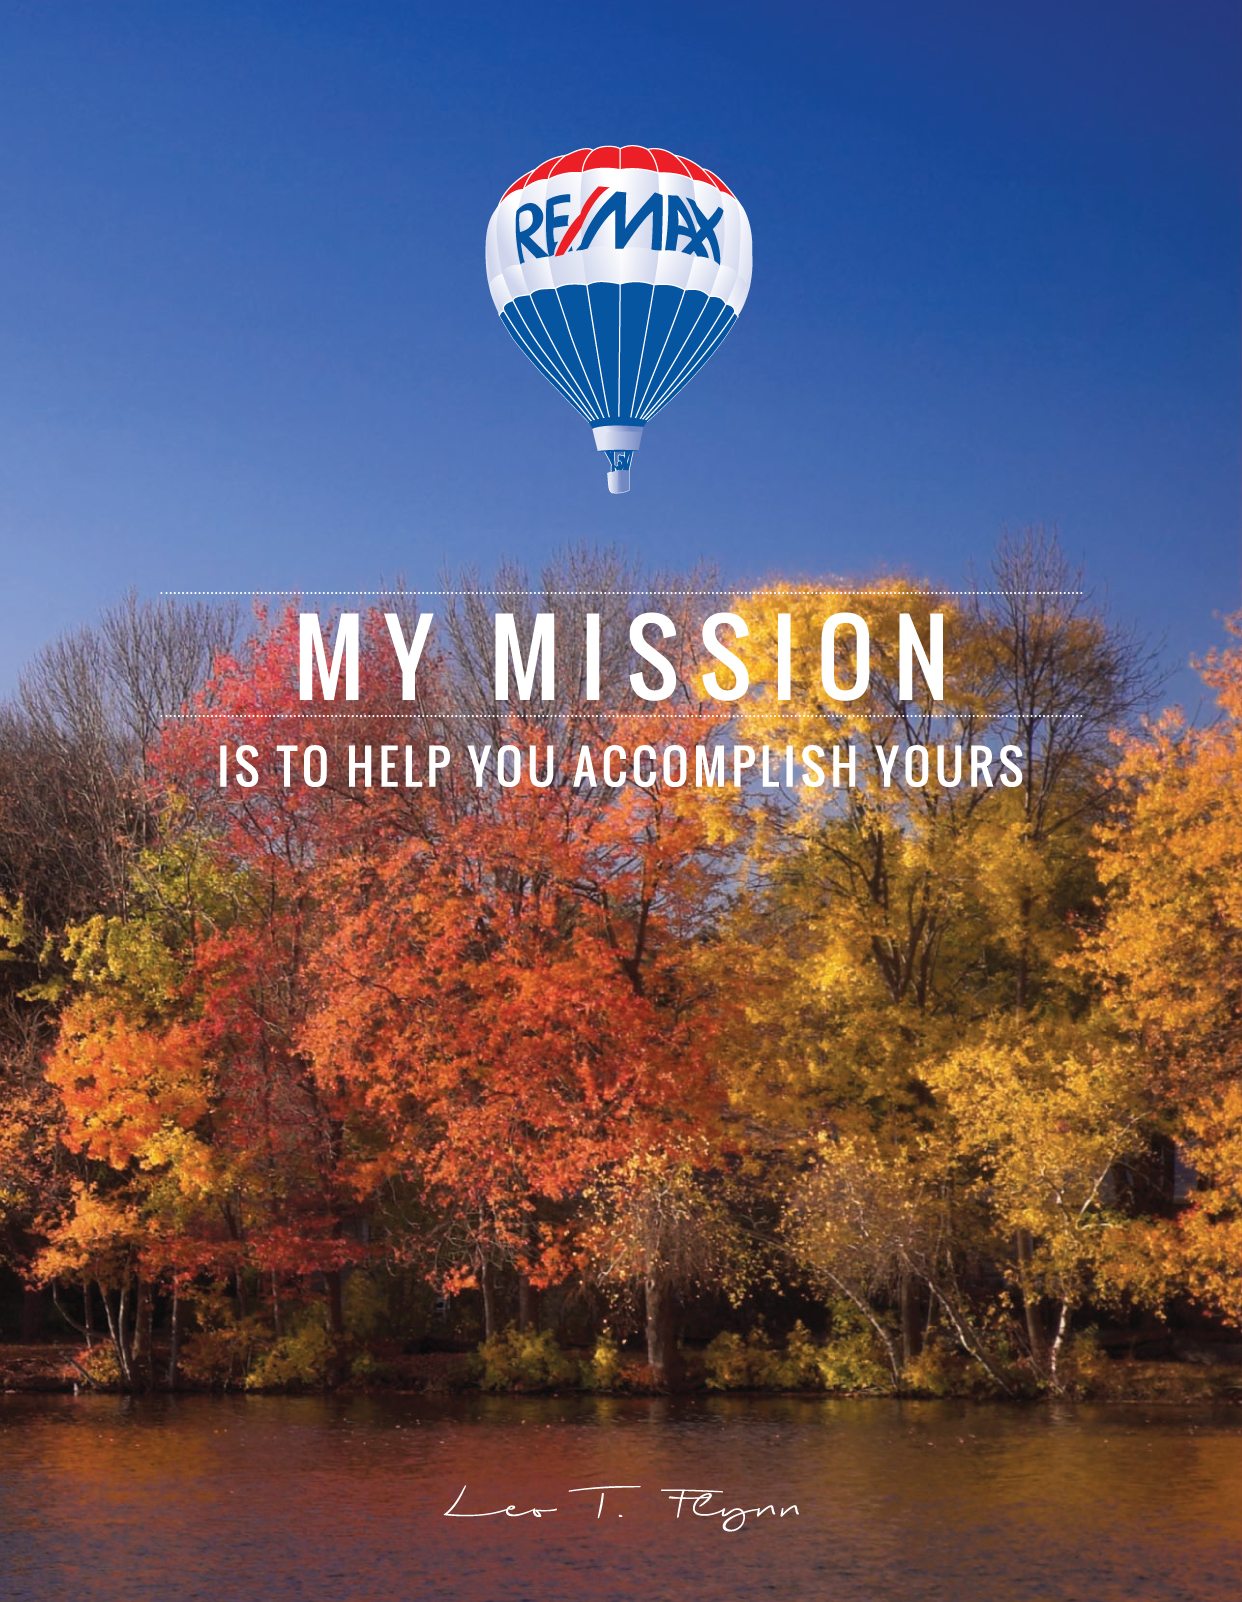 My mission is to help you accomplish yours